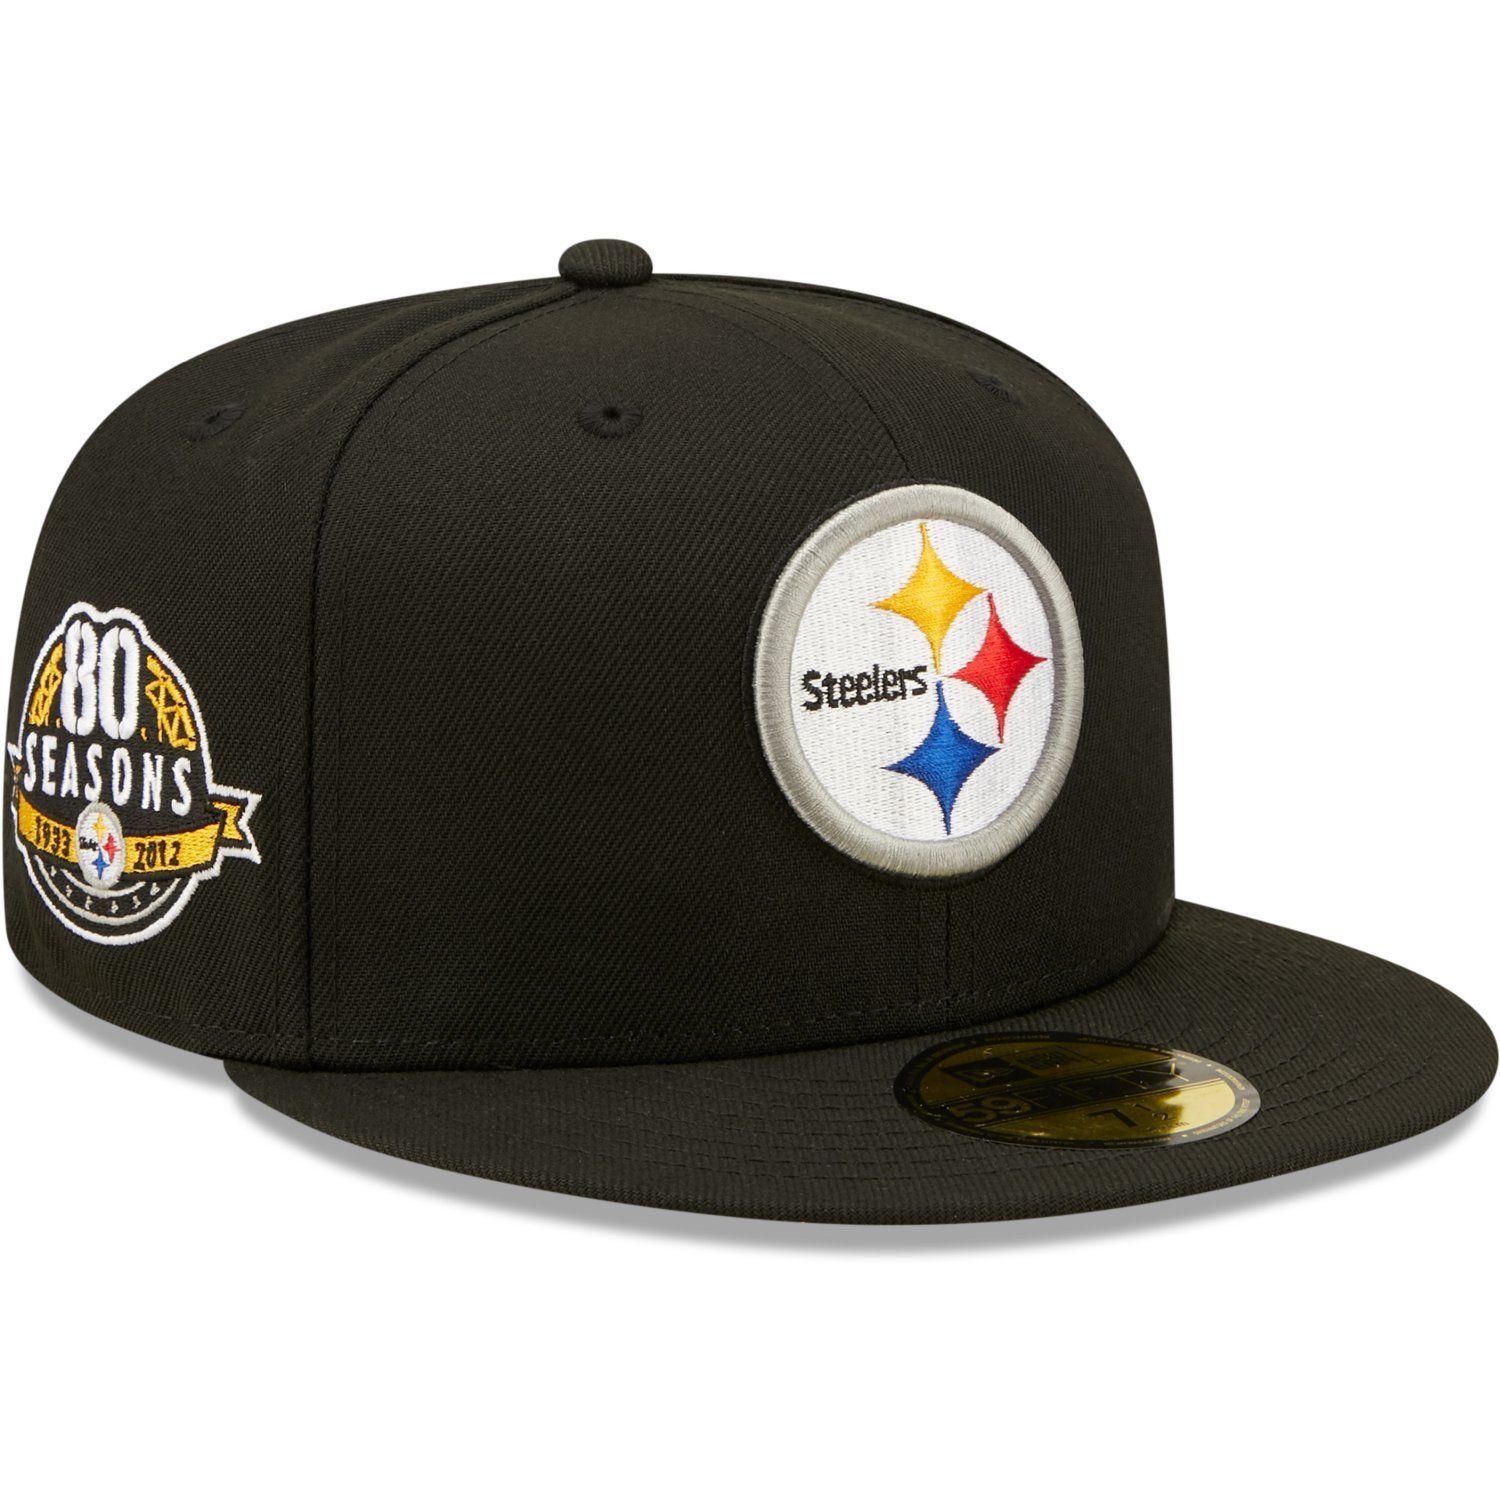 New Era Fitted Cap 59Fifty Pittsburgh Steelers 80 Seasons